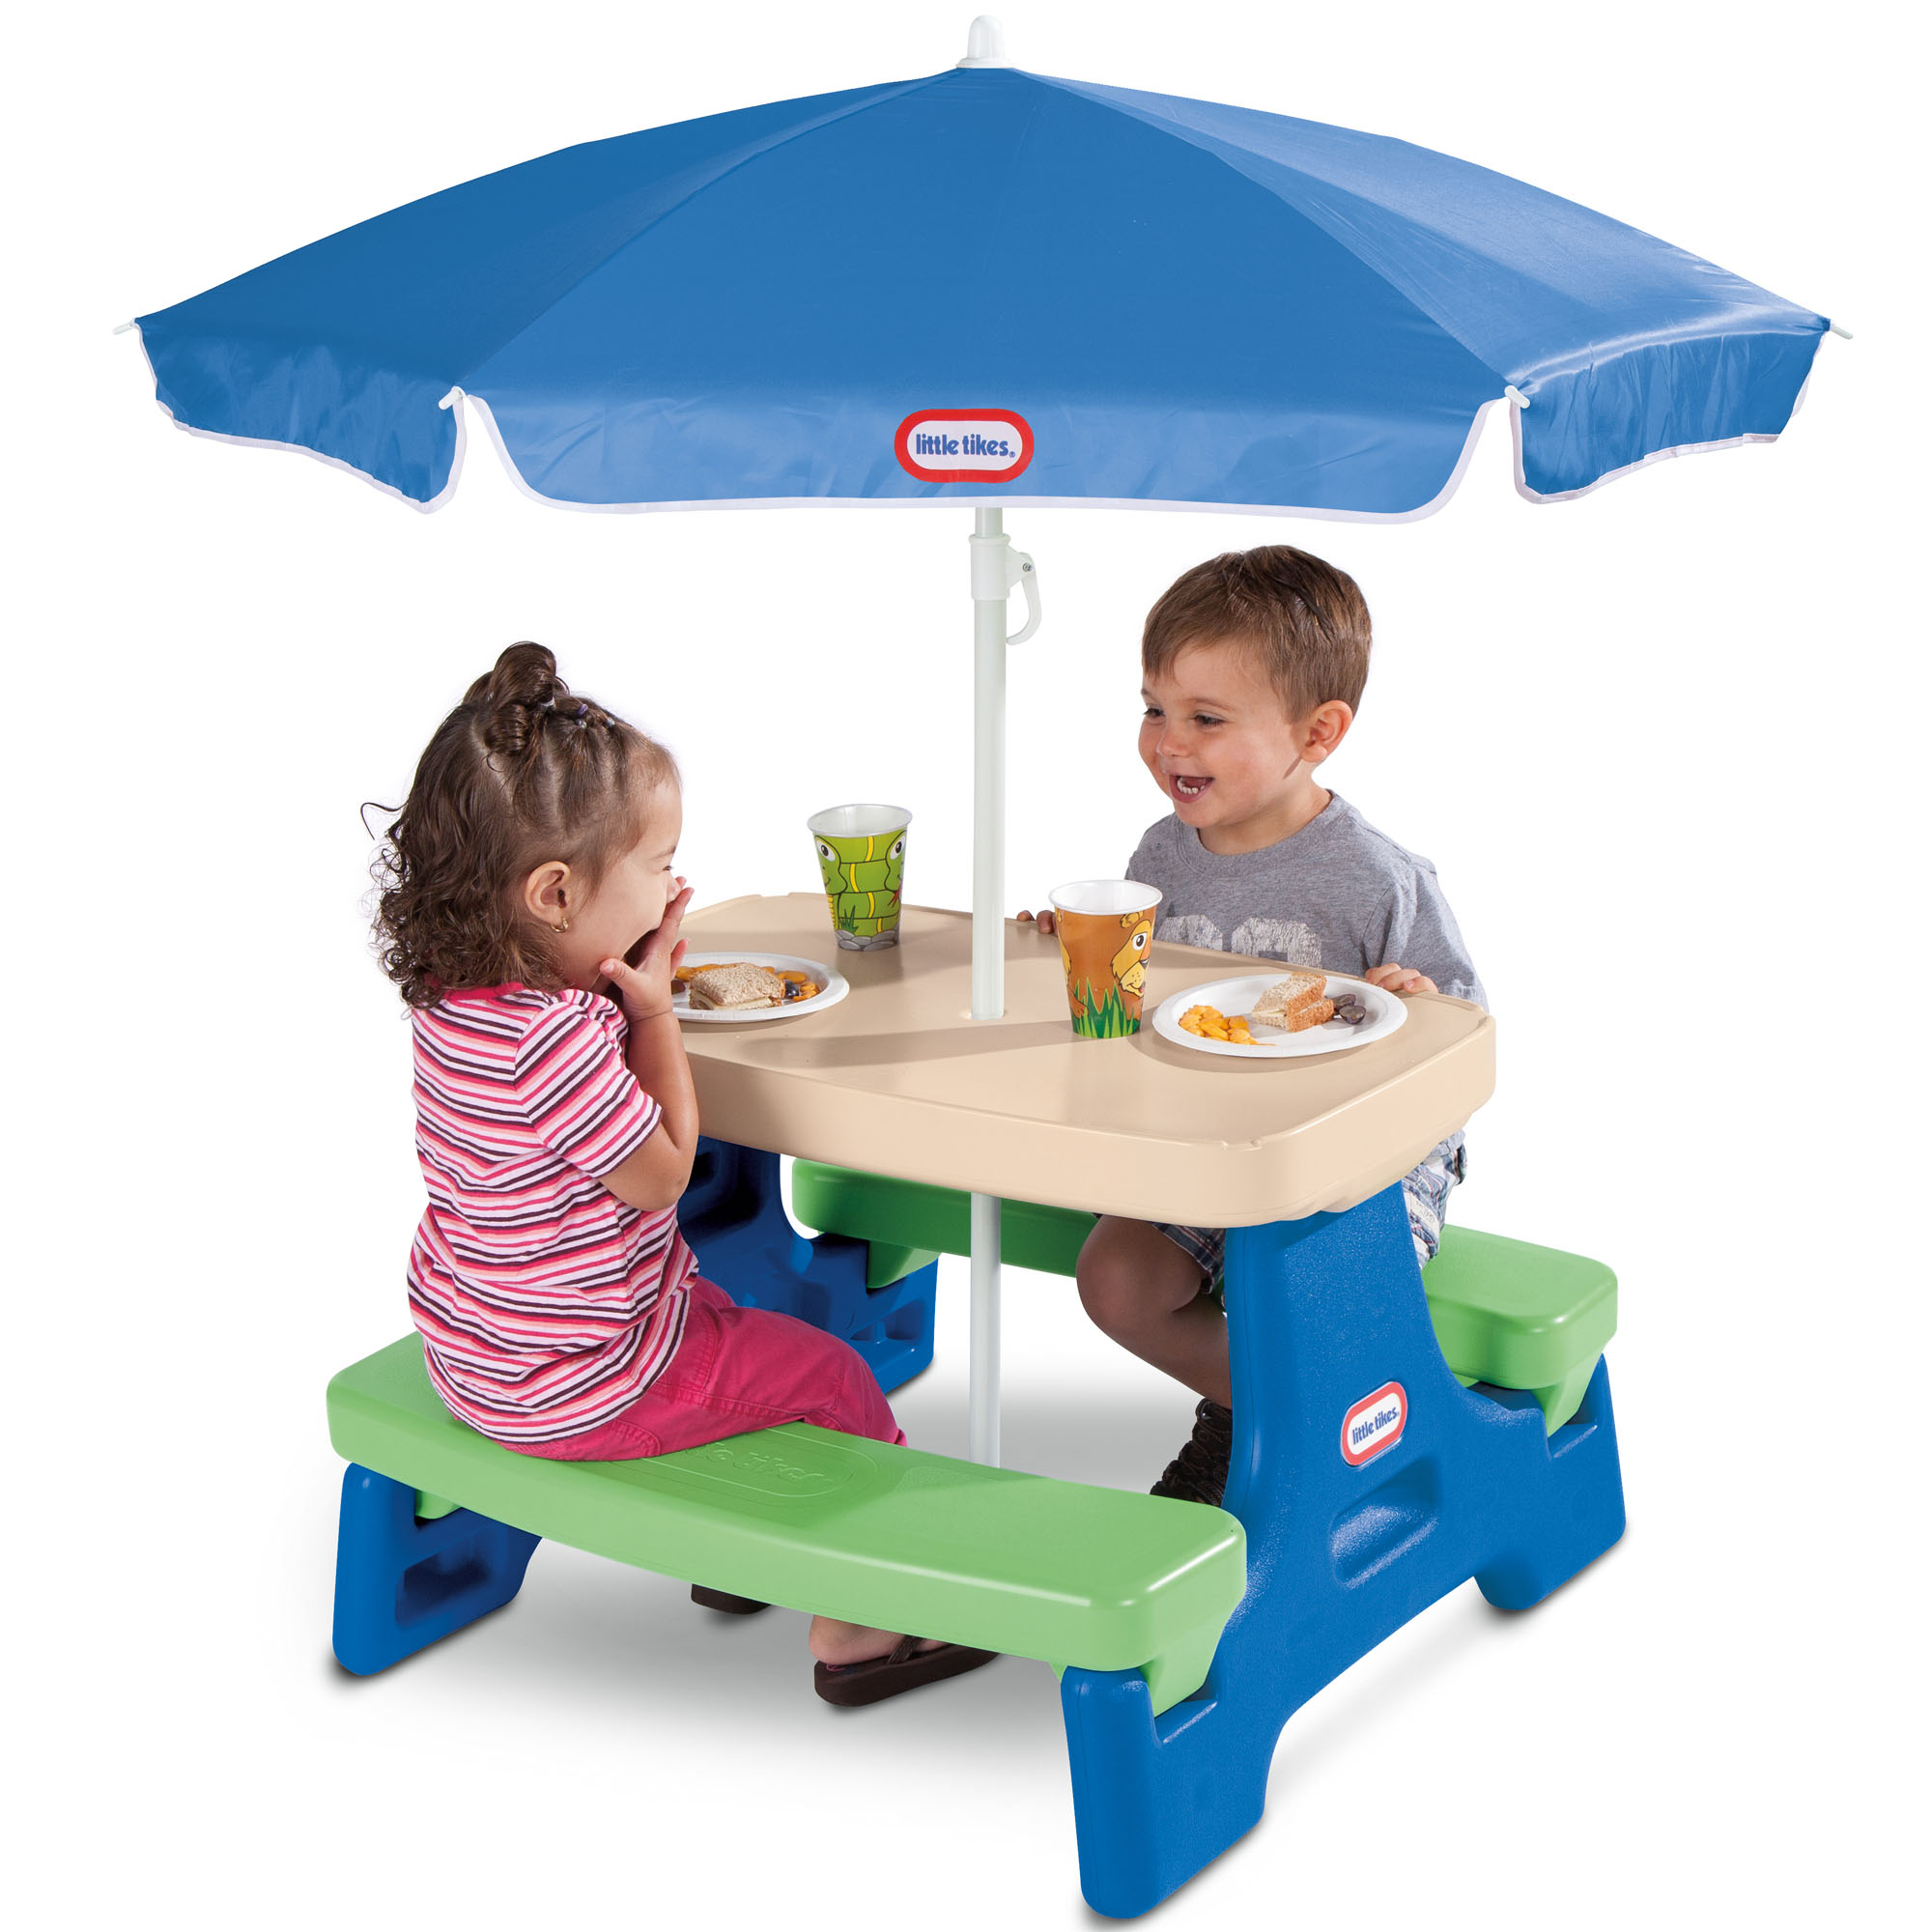 Little Tikes Easy Store Jr. Picnic Table with Umbrella, Blue & Green - Play Table with Umbrella, for Kids - image 1 of 7